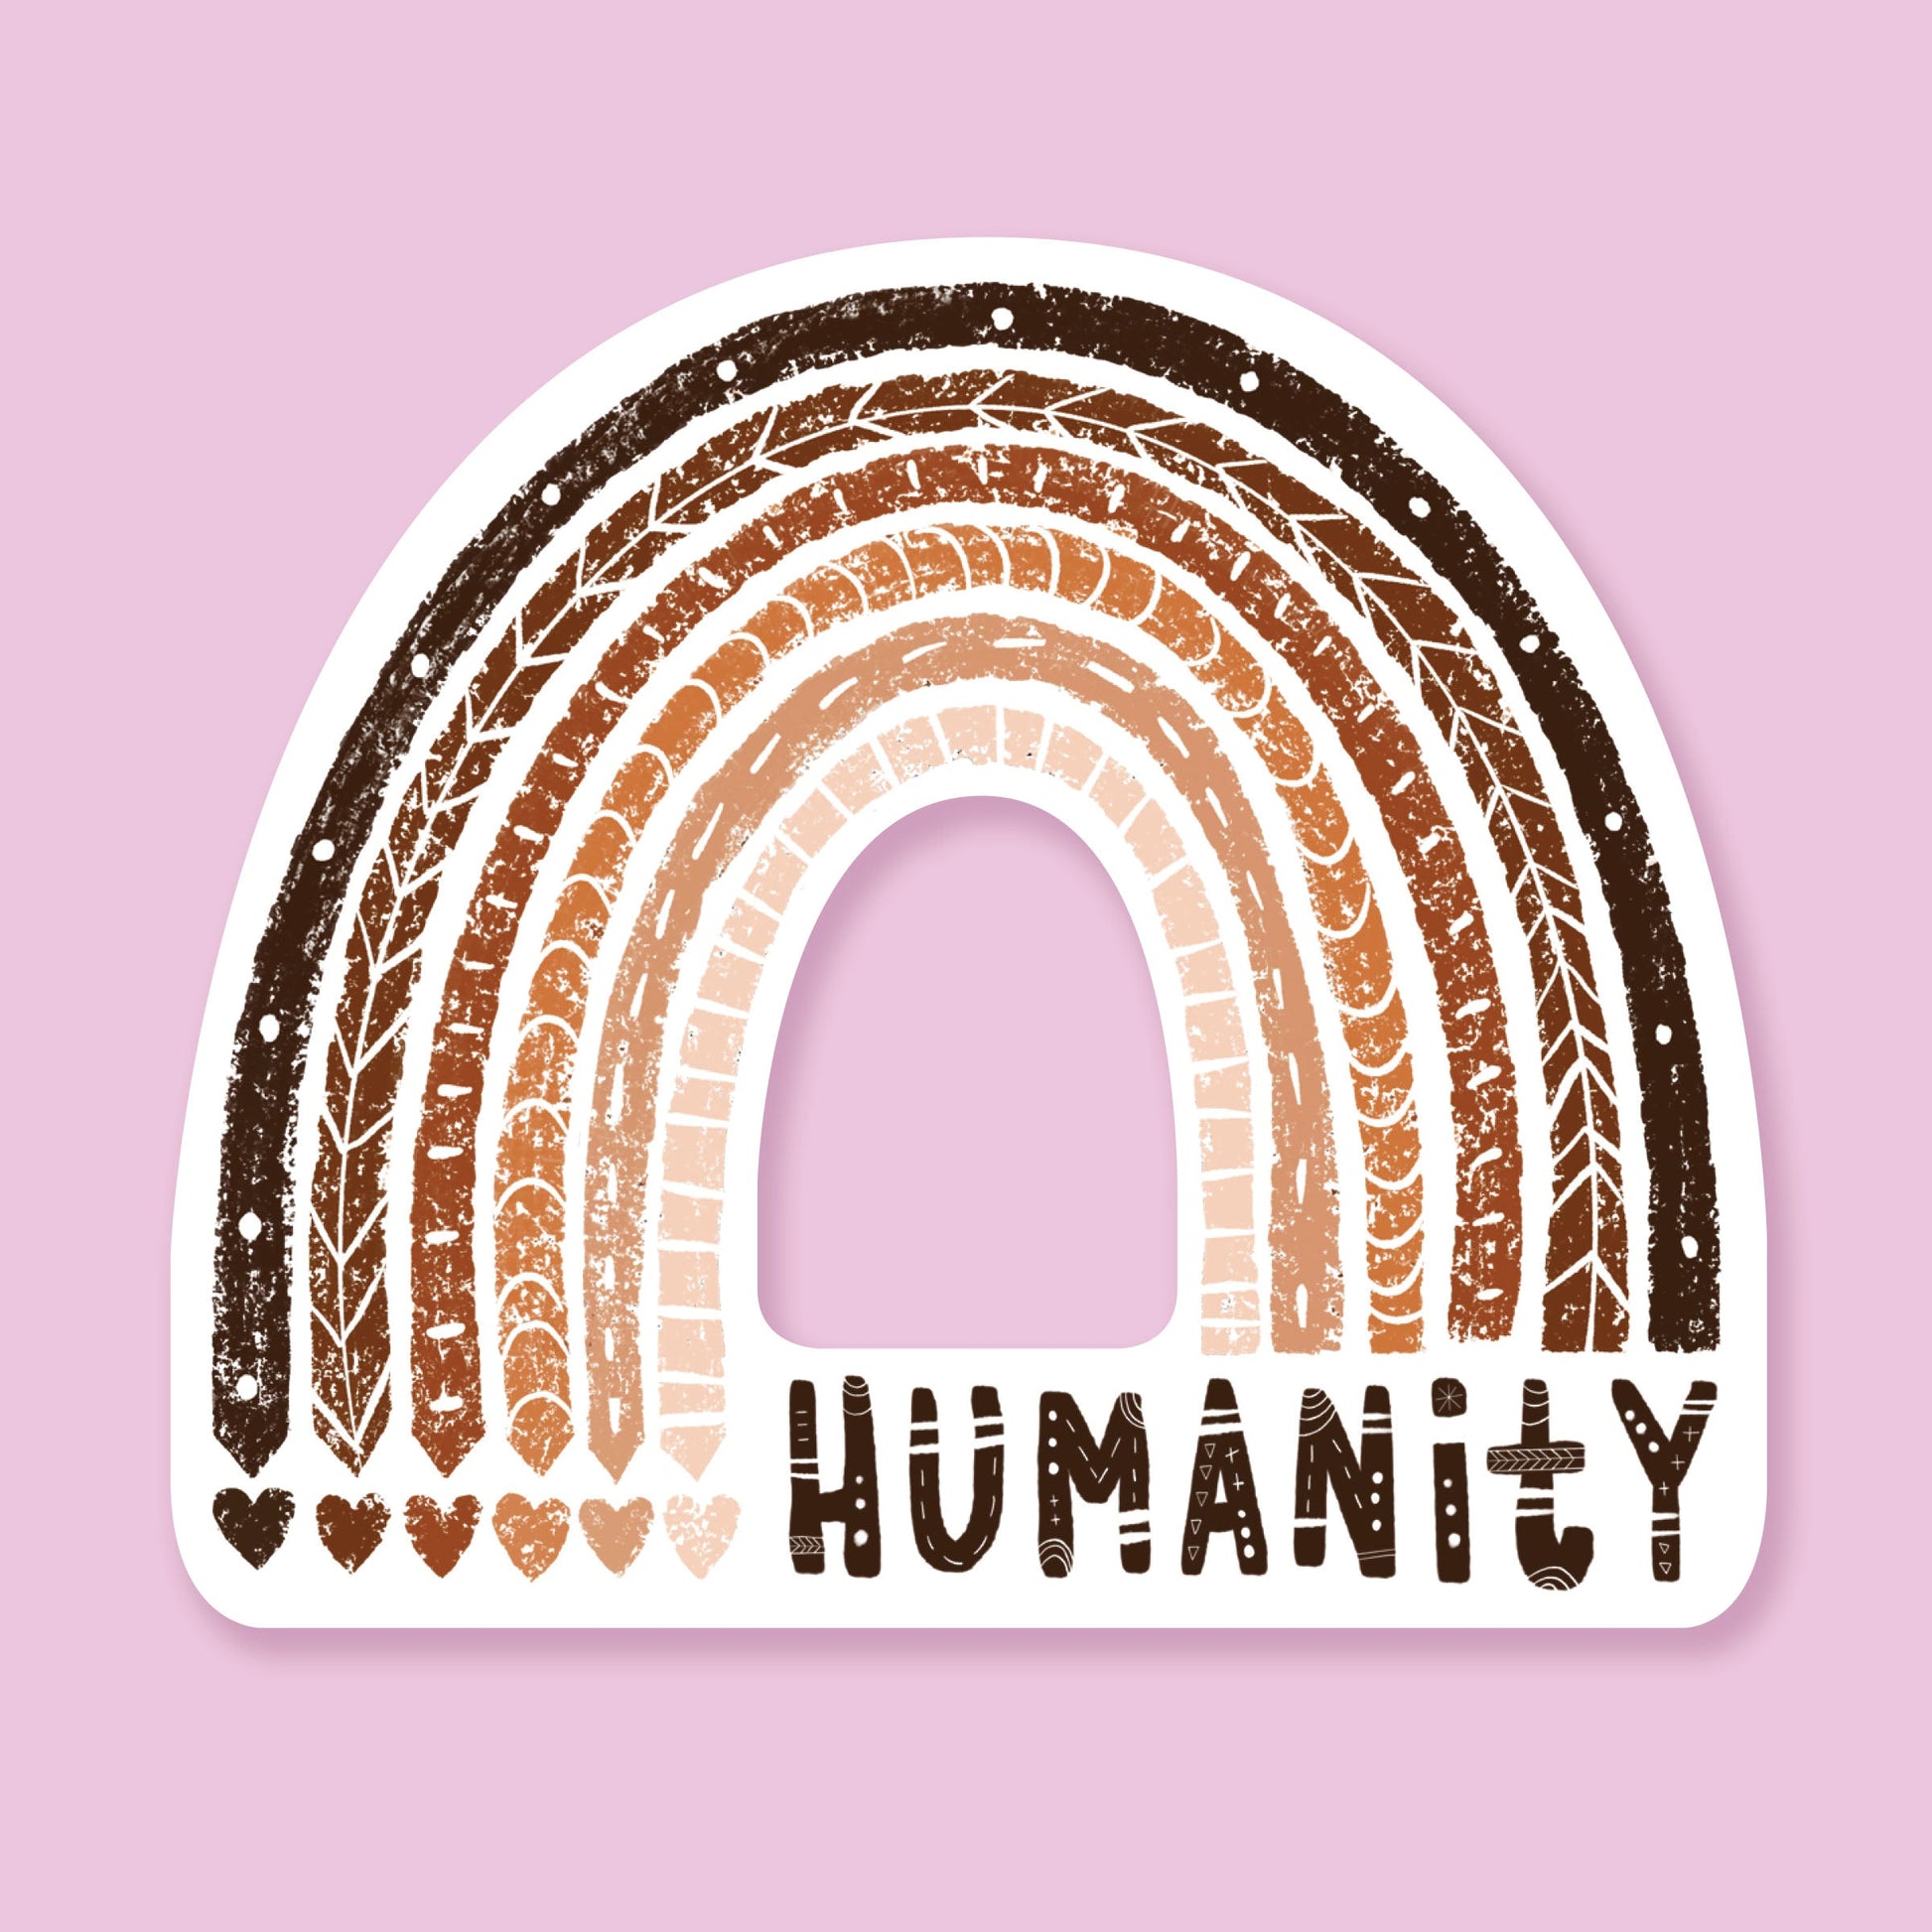 White sticker with a multicolored diverse rainbow, skintones ranging from white to dark brown. The words Humanity are hand lettered and the rainbow has decorative details. Sticker sits on a lavender background. 